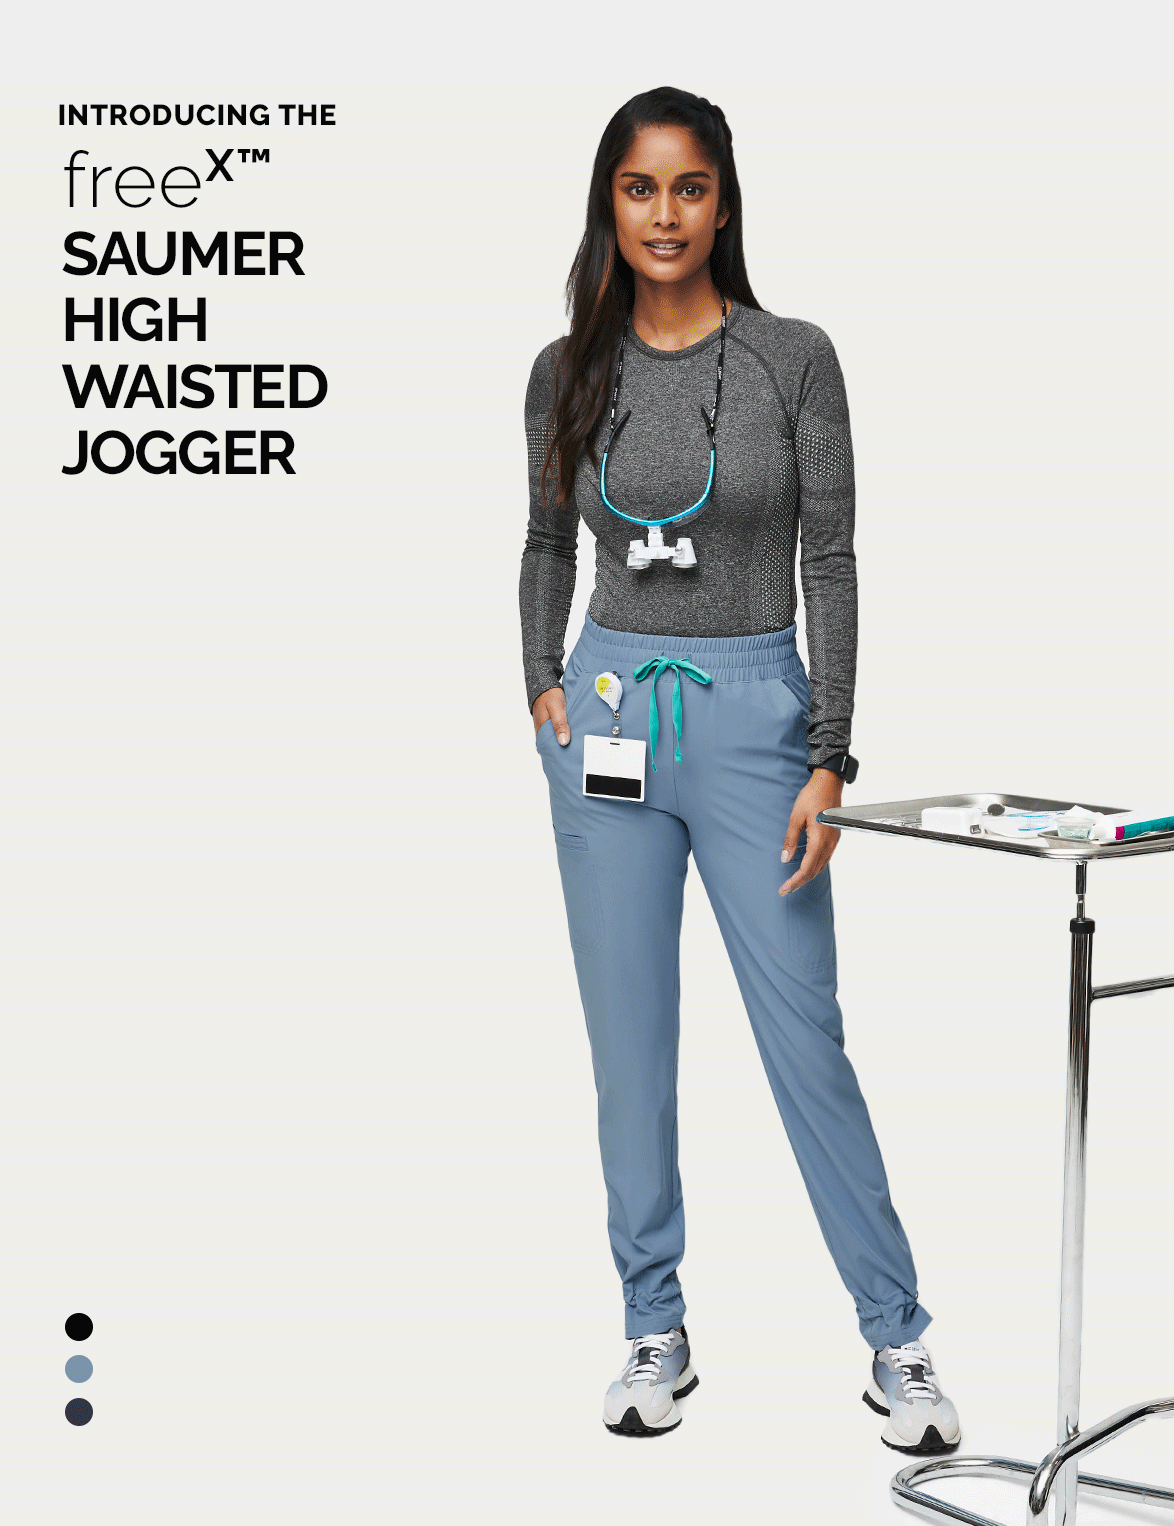 NEW STYLE — FREEx™ SAUMER HIGH WAISTED JOGGER